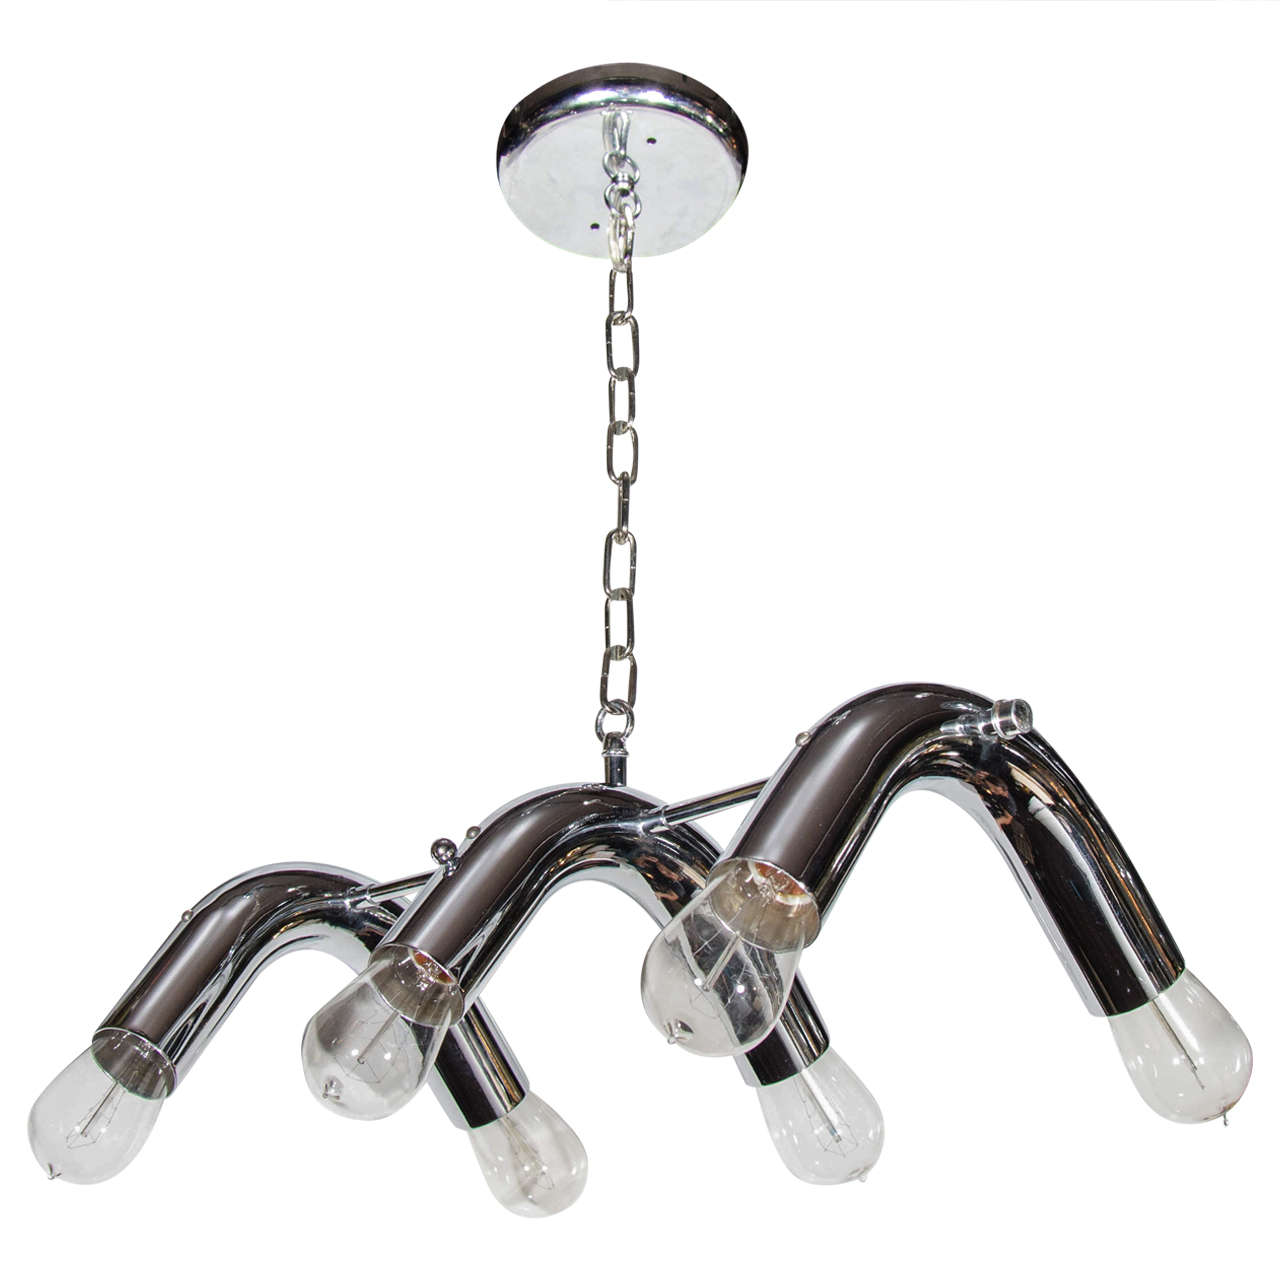 Tubular chrome frame design with six retro style filament lights.
Adjustable chain height.